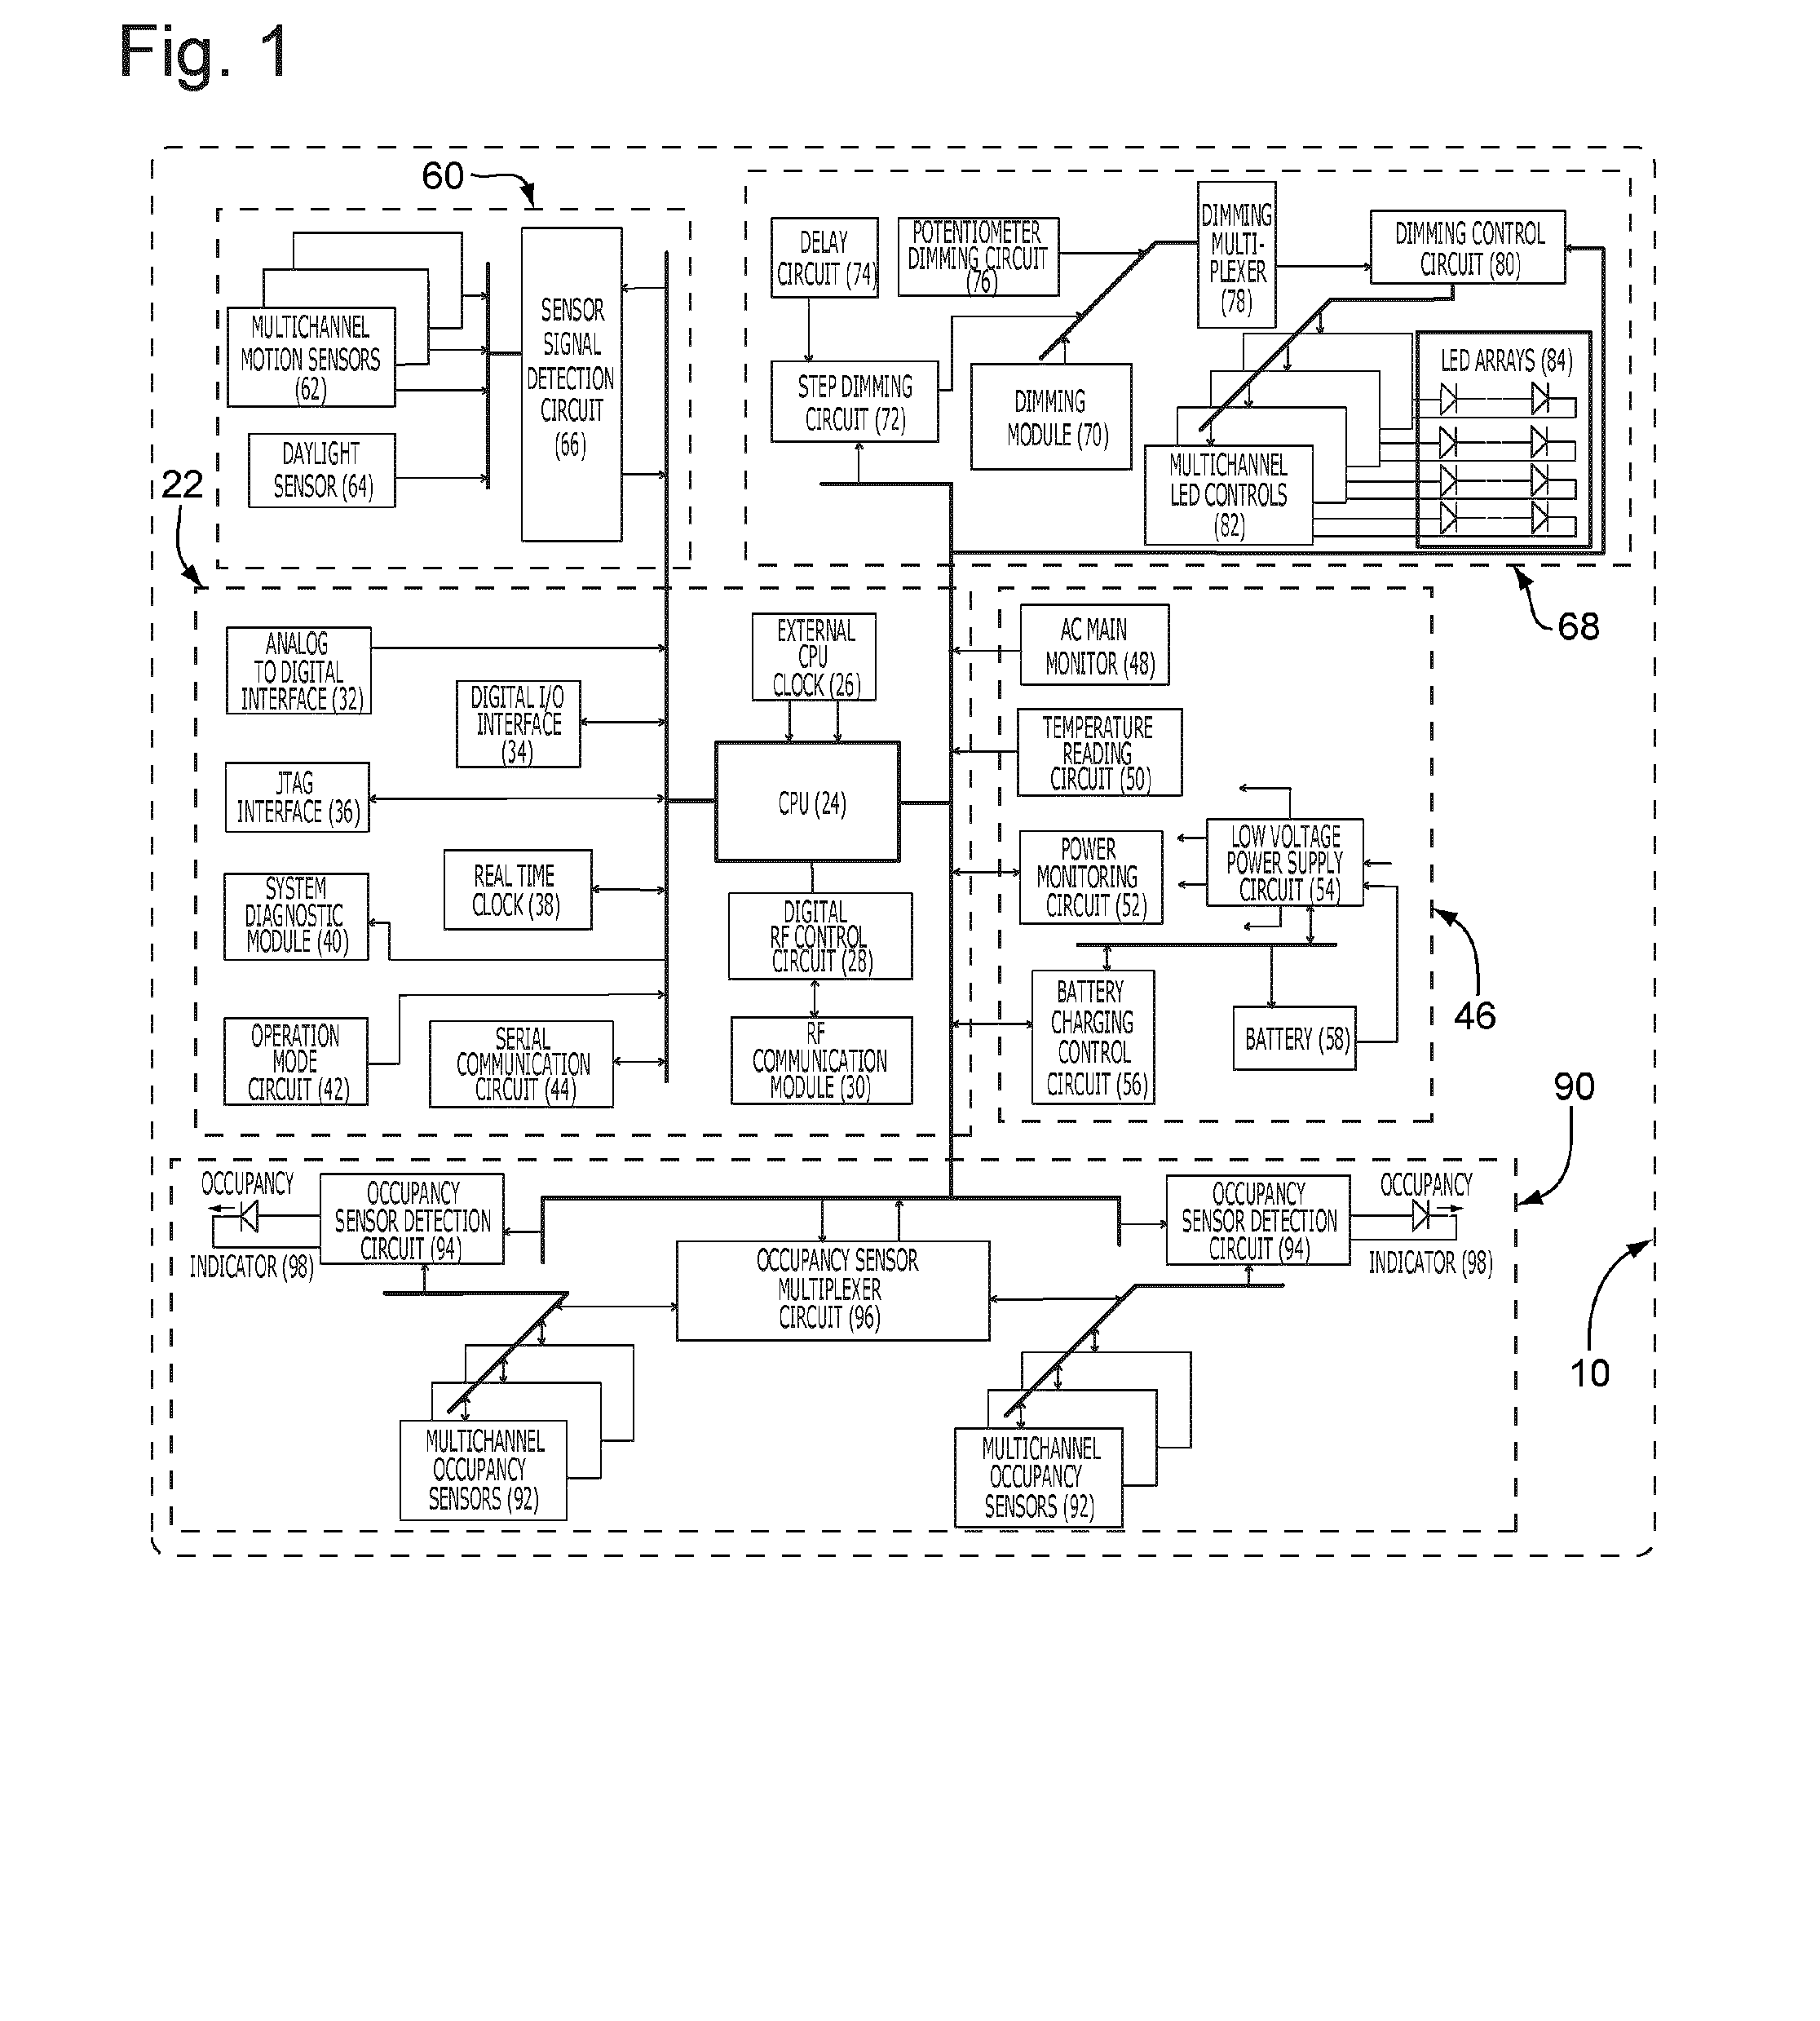 Wireless lighting and electrical device control system